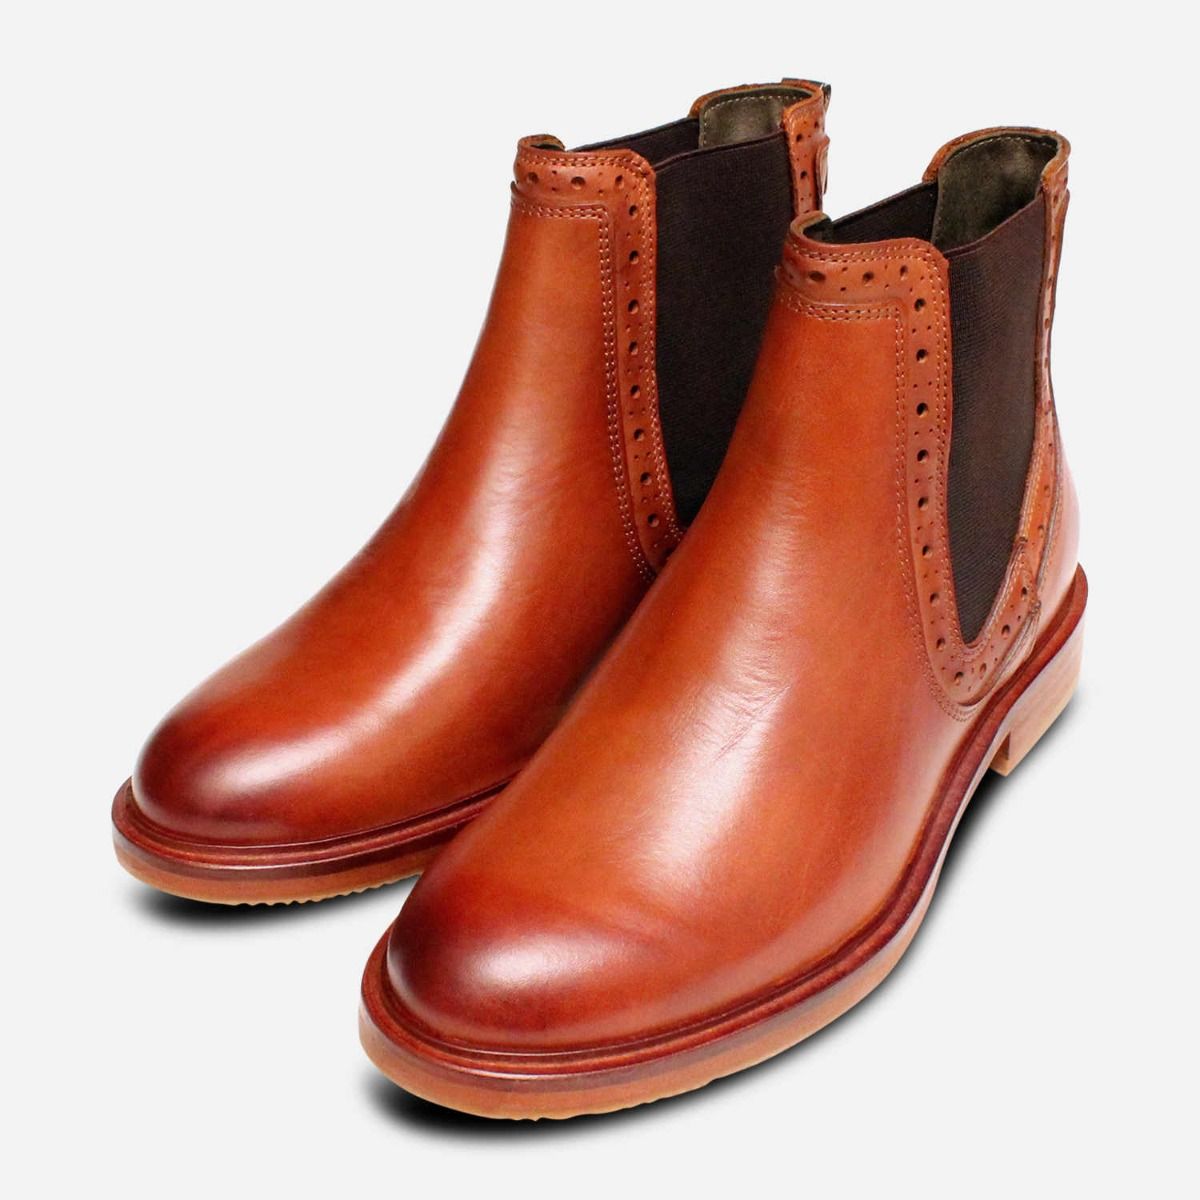 Barbour Classic Chelsea Boots in Antique Leather